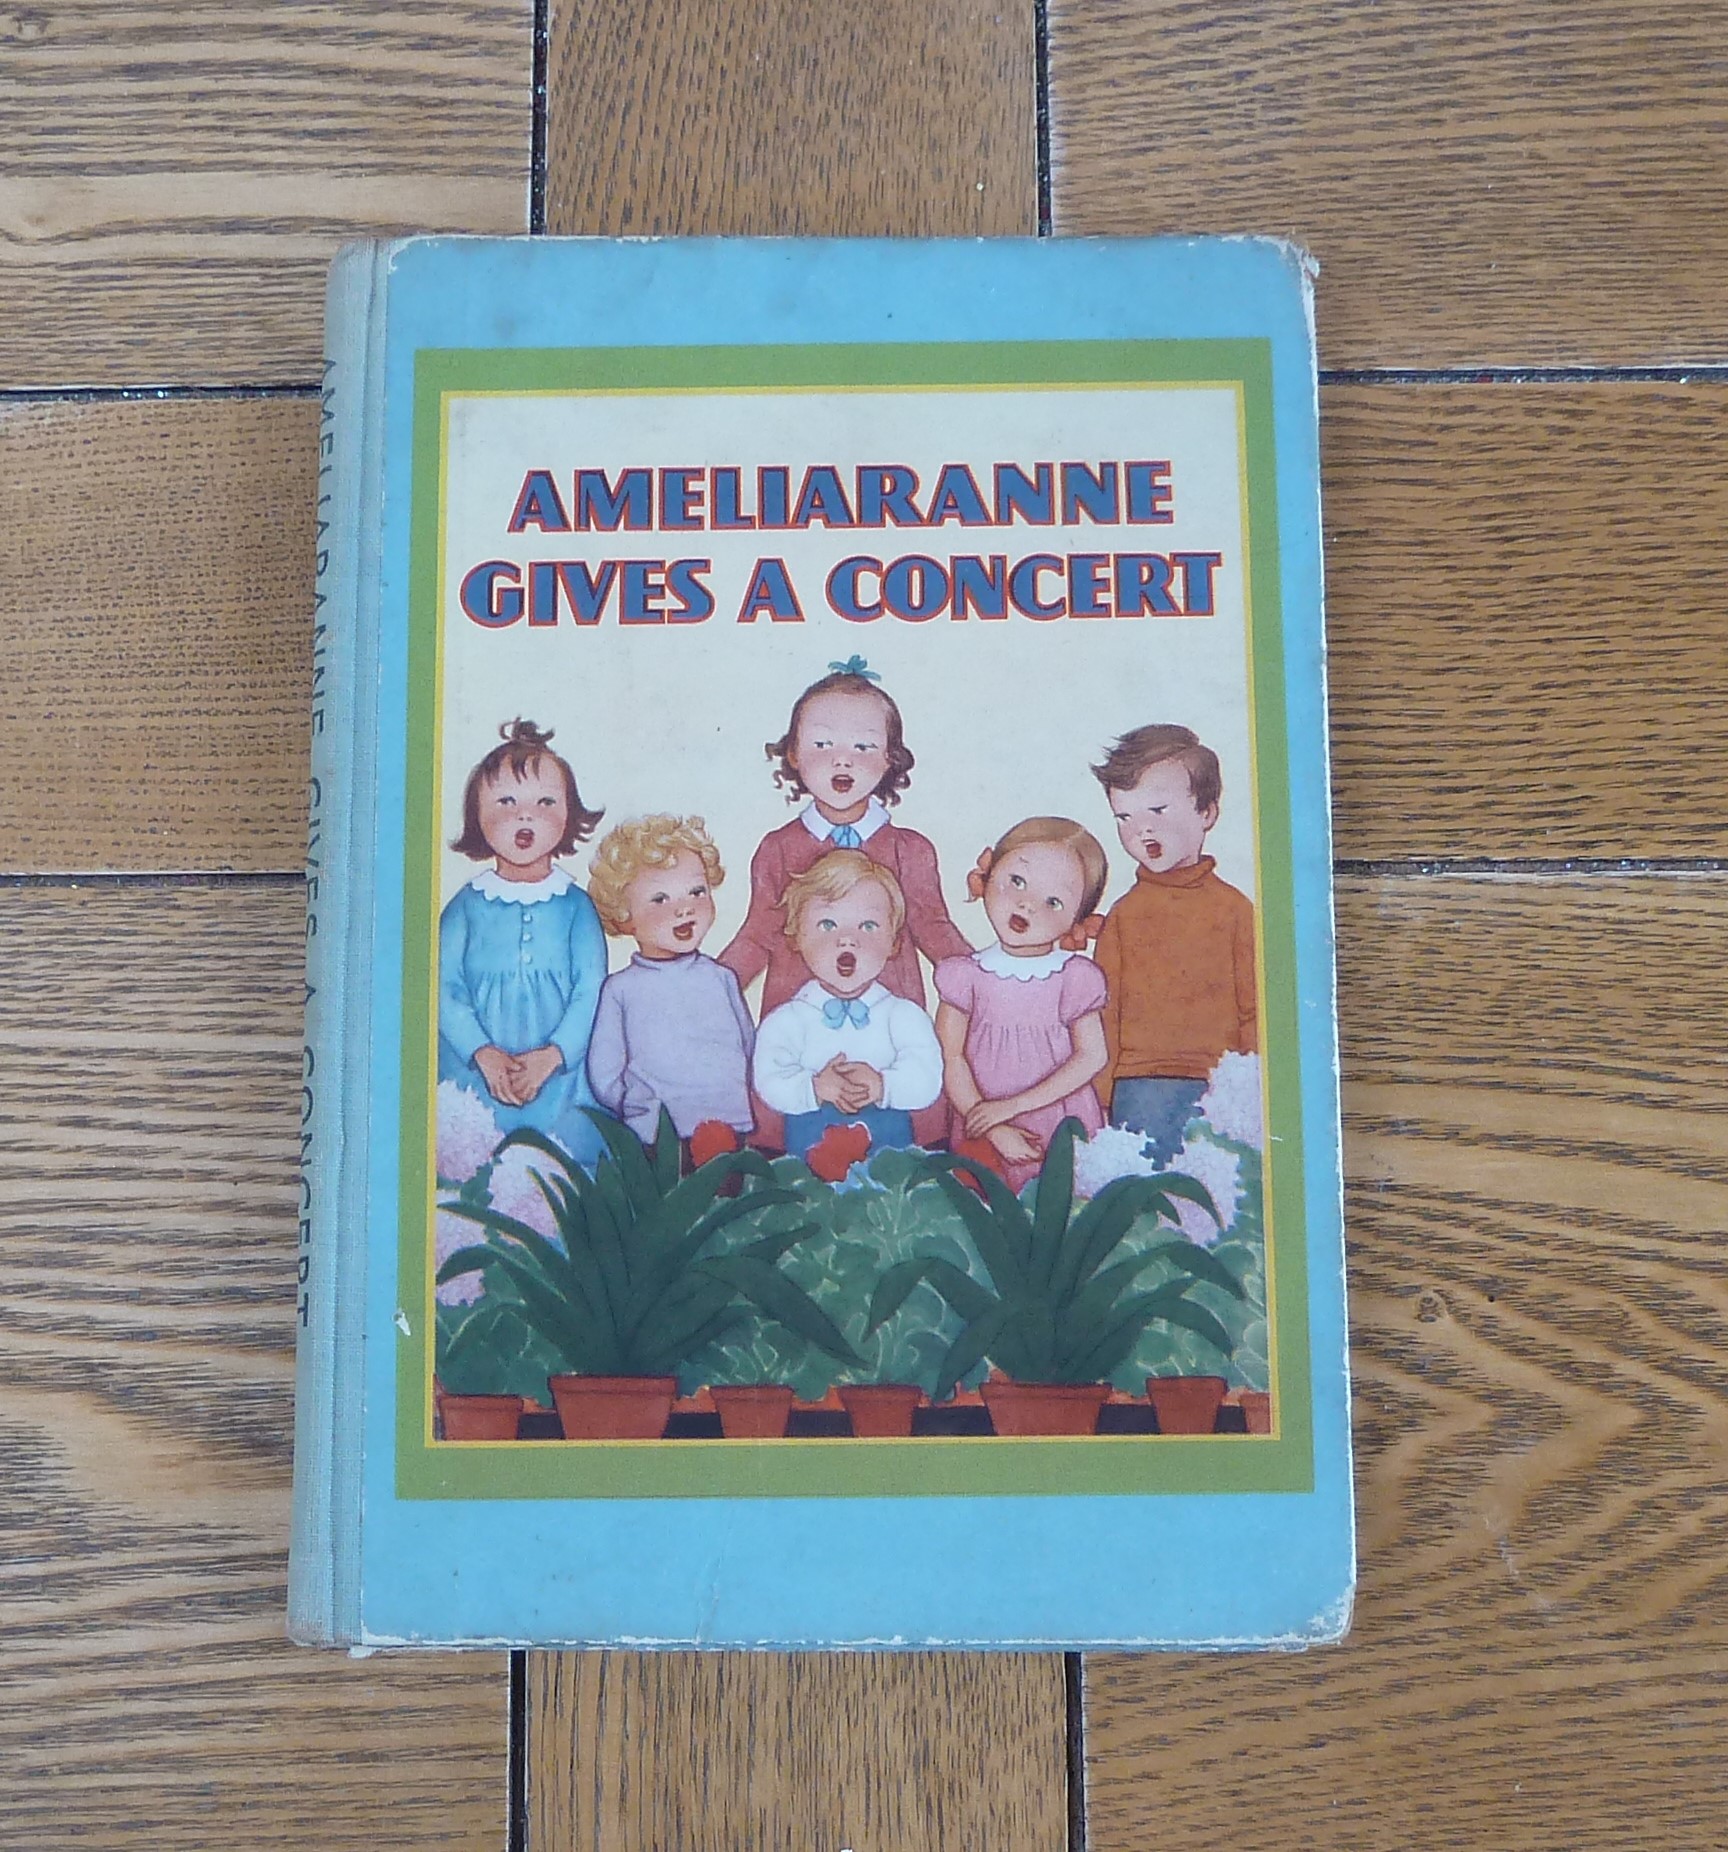 Ameliaranne Gives a Concert by Margaret Gilmore